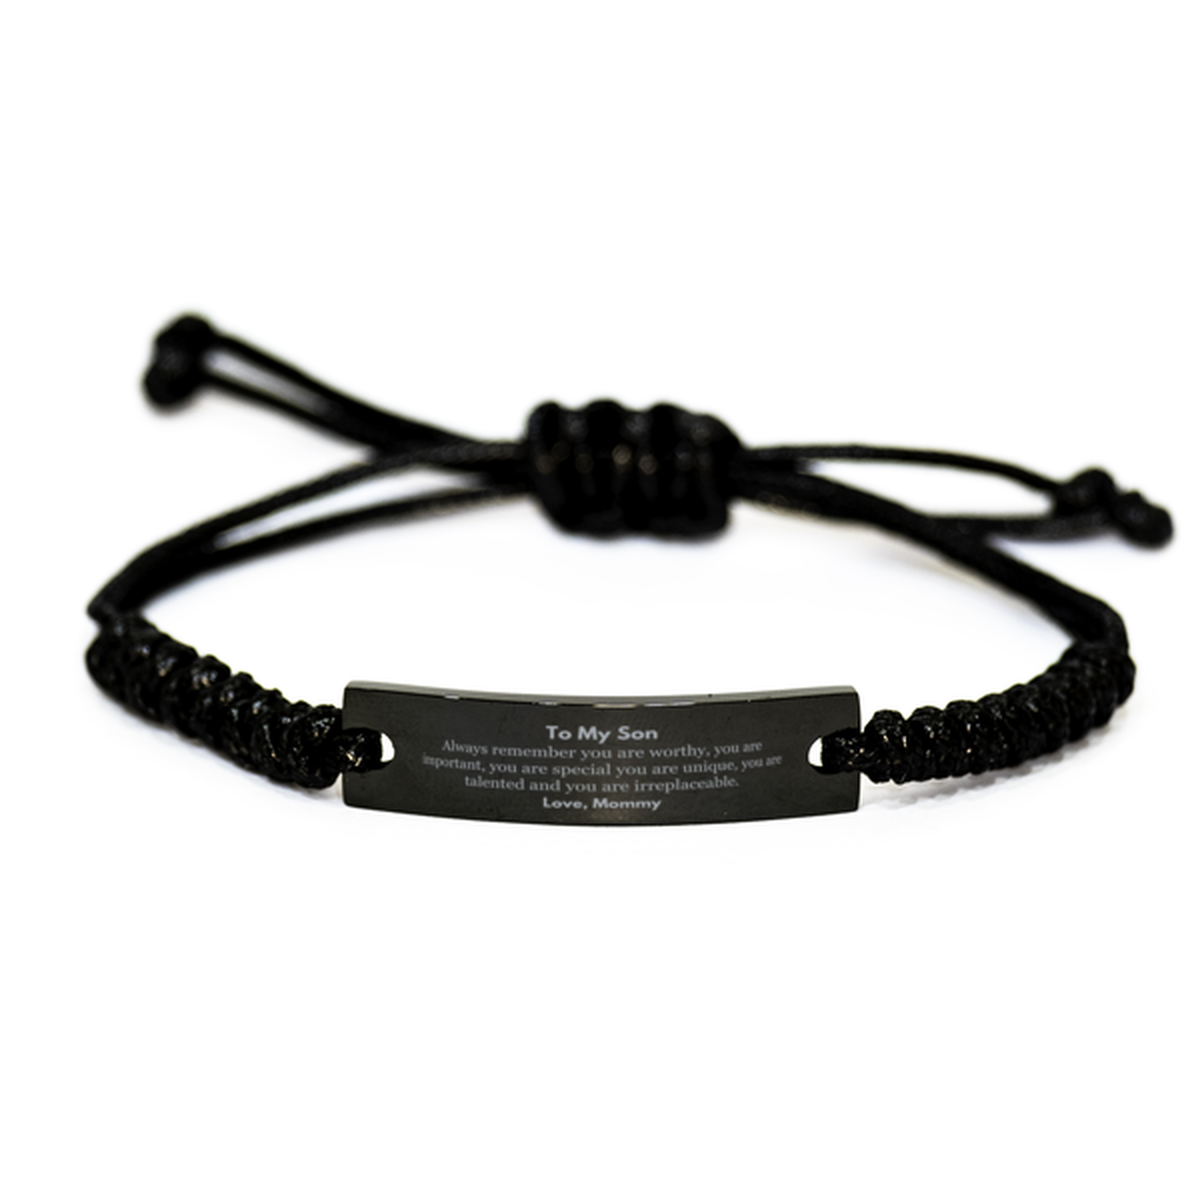 Son Birthday Gifts from Mommy, Inspirational Black Rope Bracelet for Son Christmas Graduation Gifts for Son Always remember you are worthy, you are important. Love, Mommy